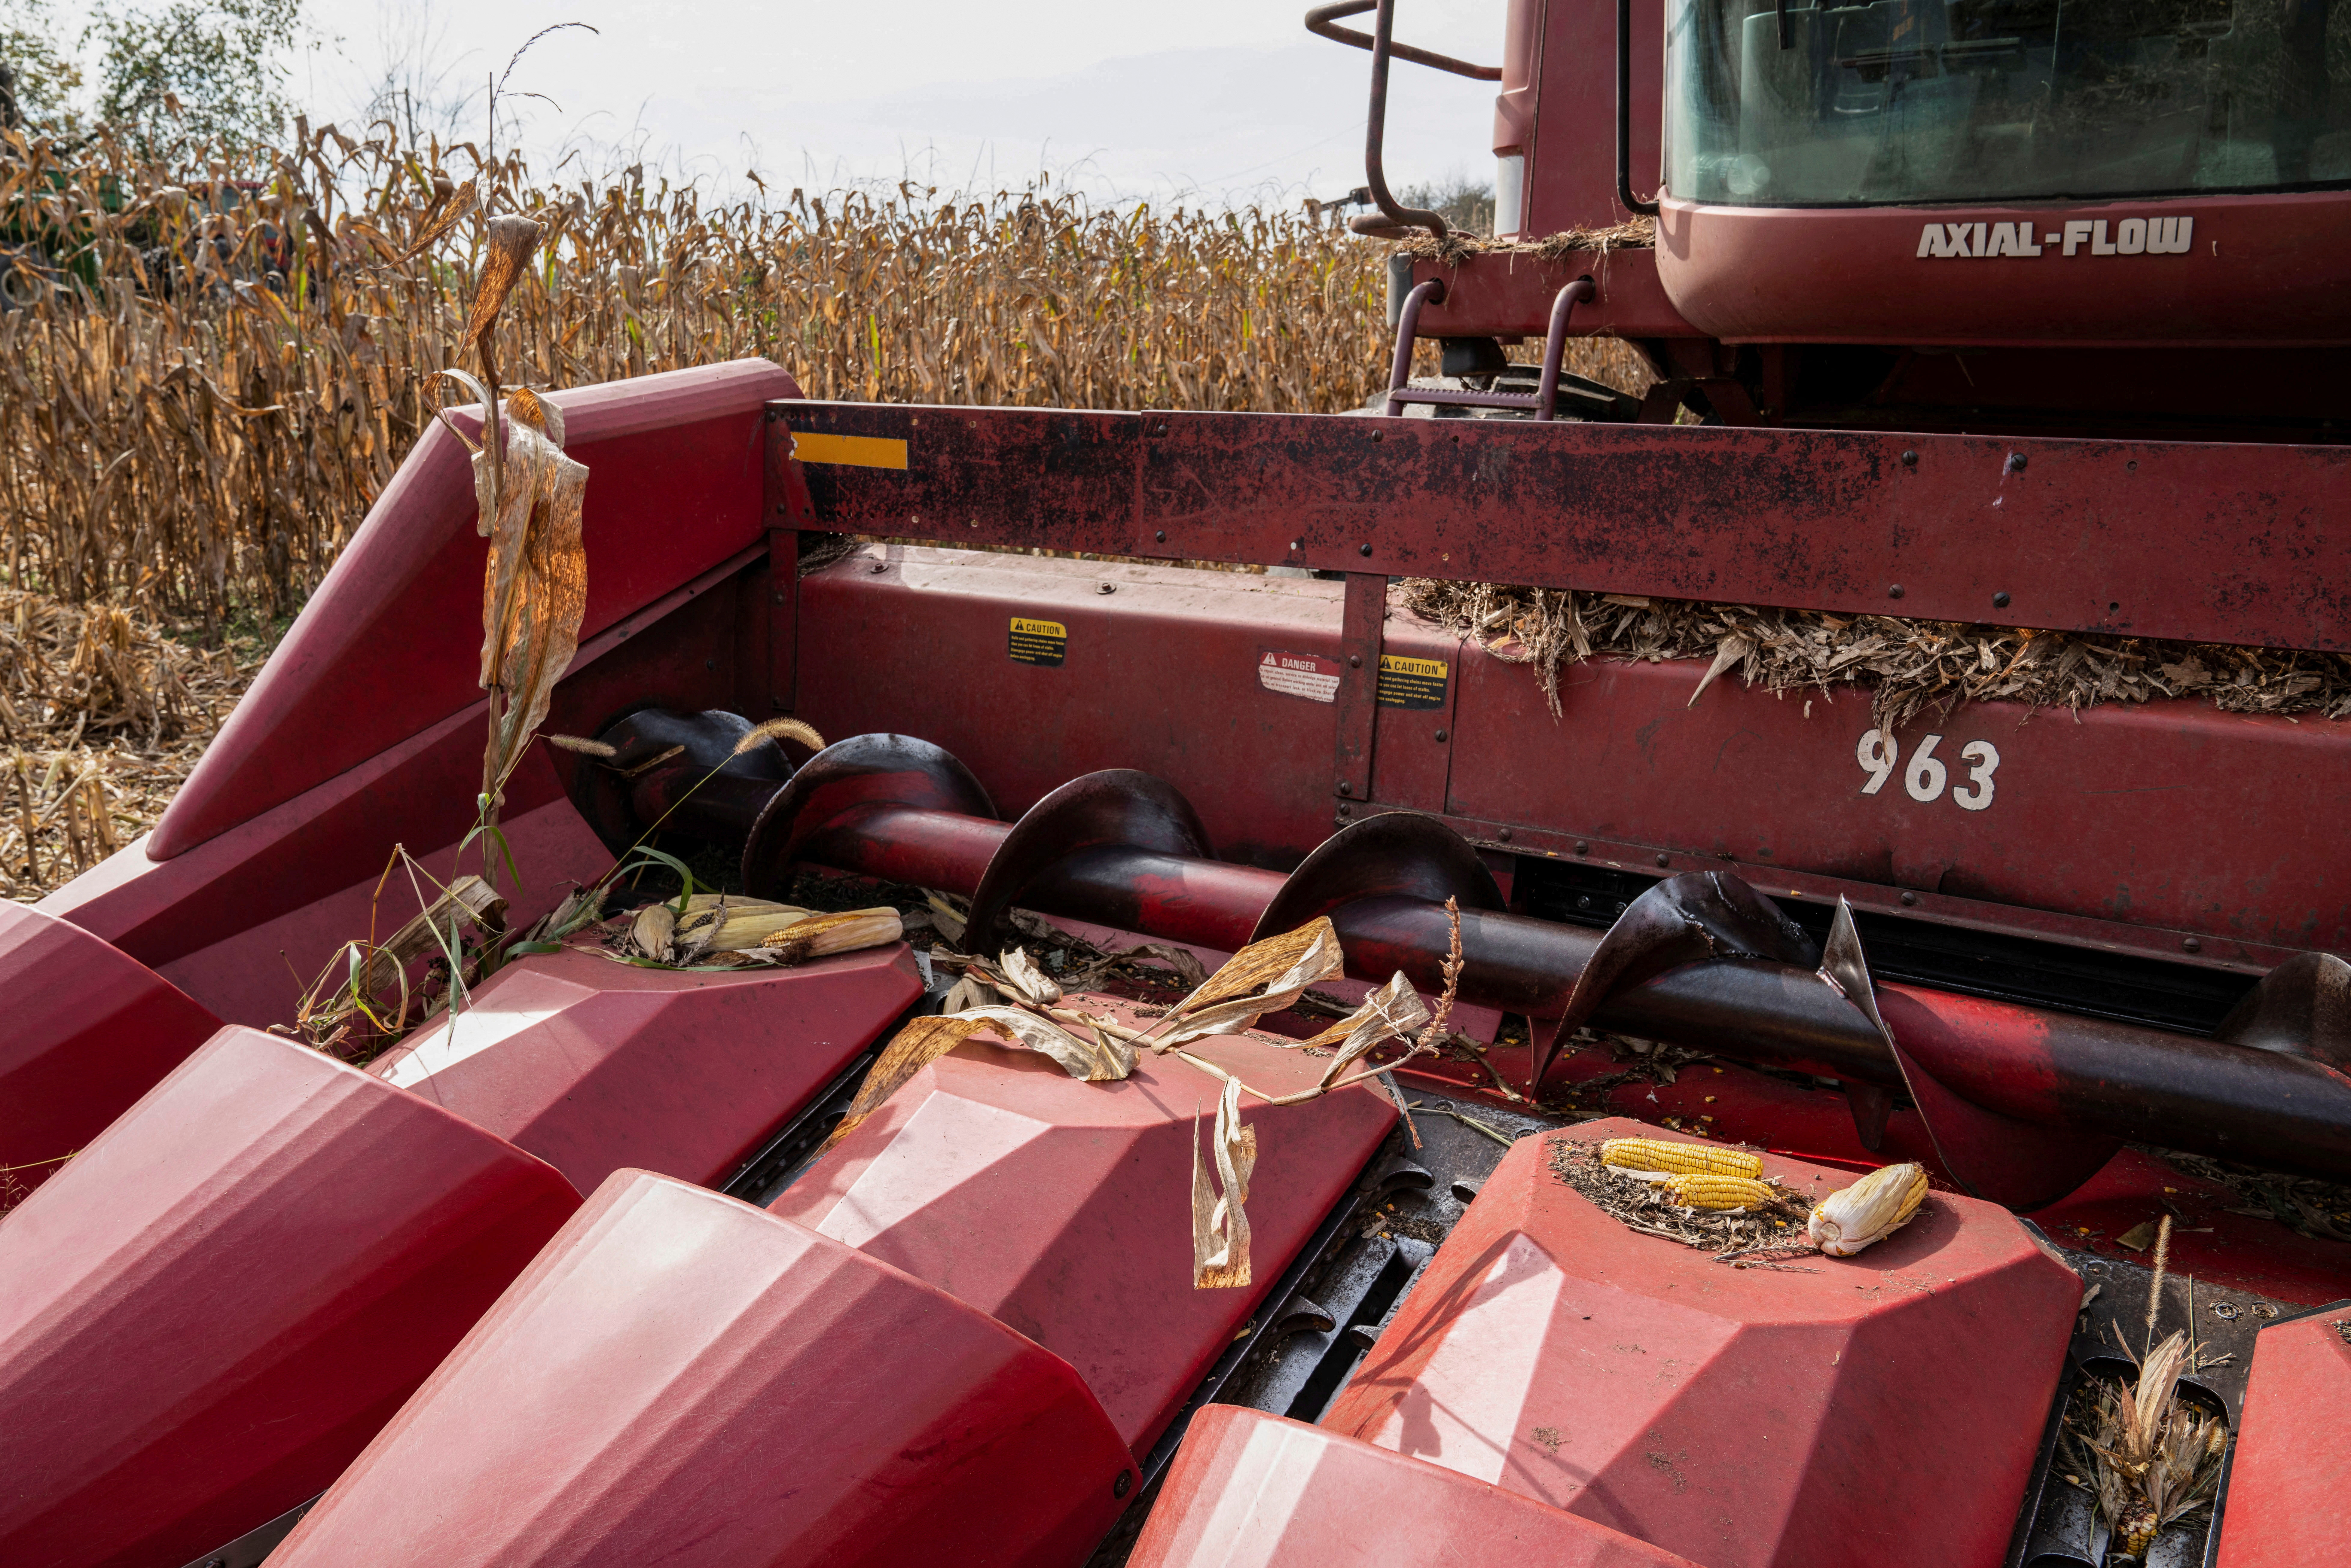 Lack of right-to-repair may cost farmers more than $3 billion